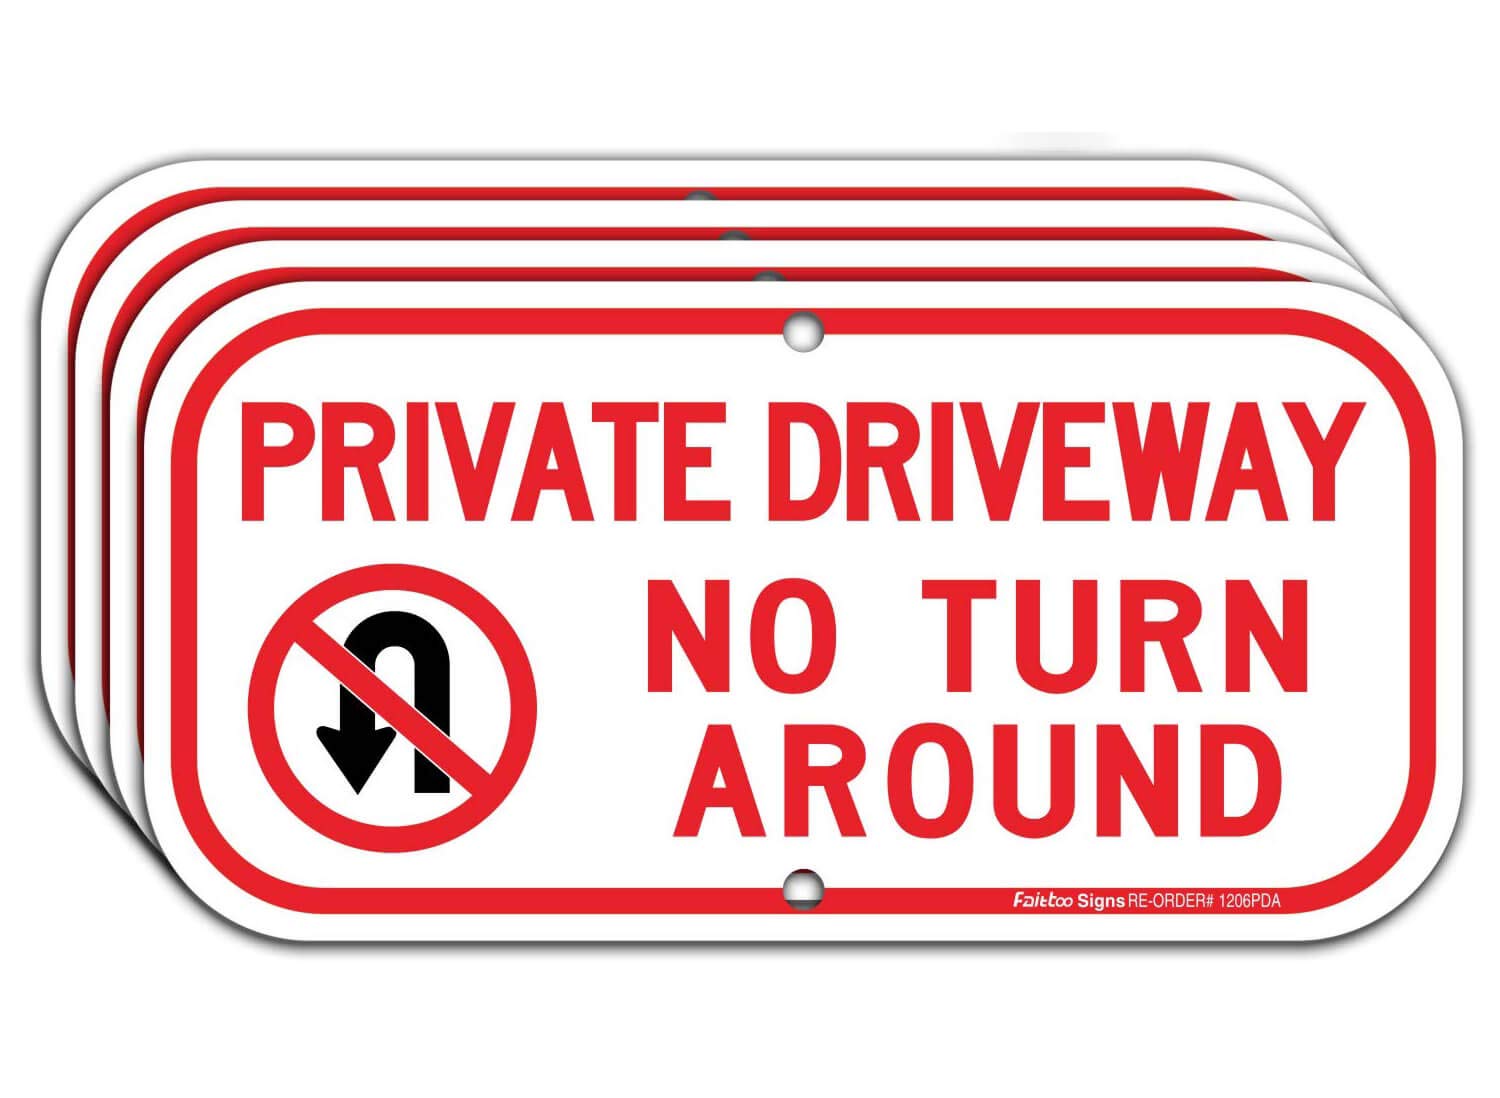 Private Driveway Sign,No Turn Around Driveway Sign, 4 Pack, Reflective .40 Rust Free Aluminum 12 x 6 Inches, UV Protected, Weather Resistant, Waterproof, Durable Ink，Easy to Mount